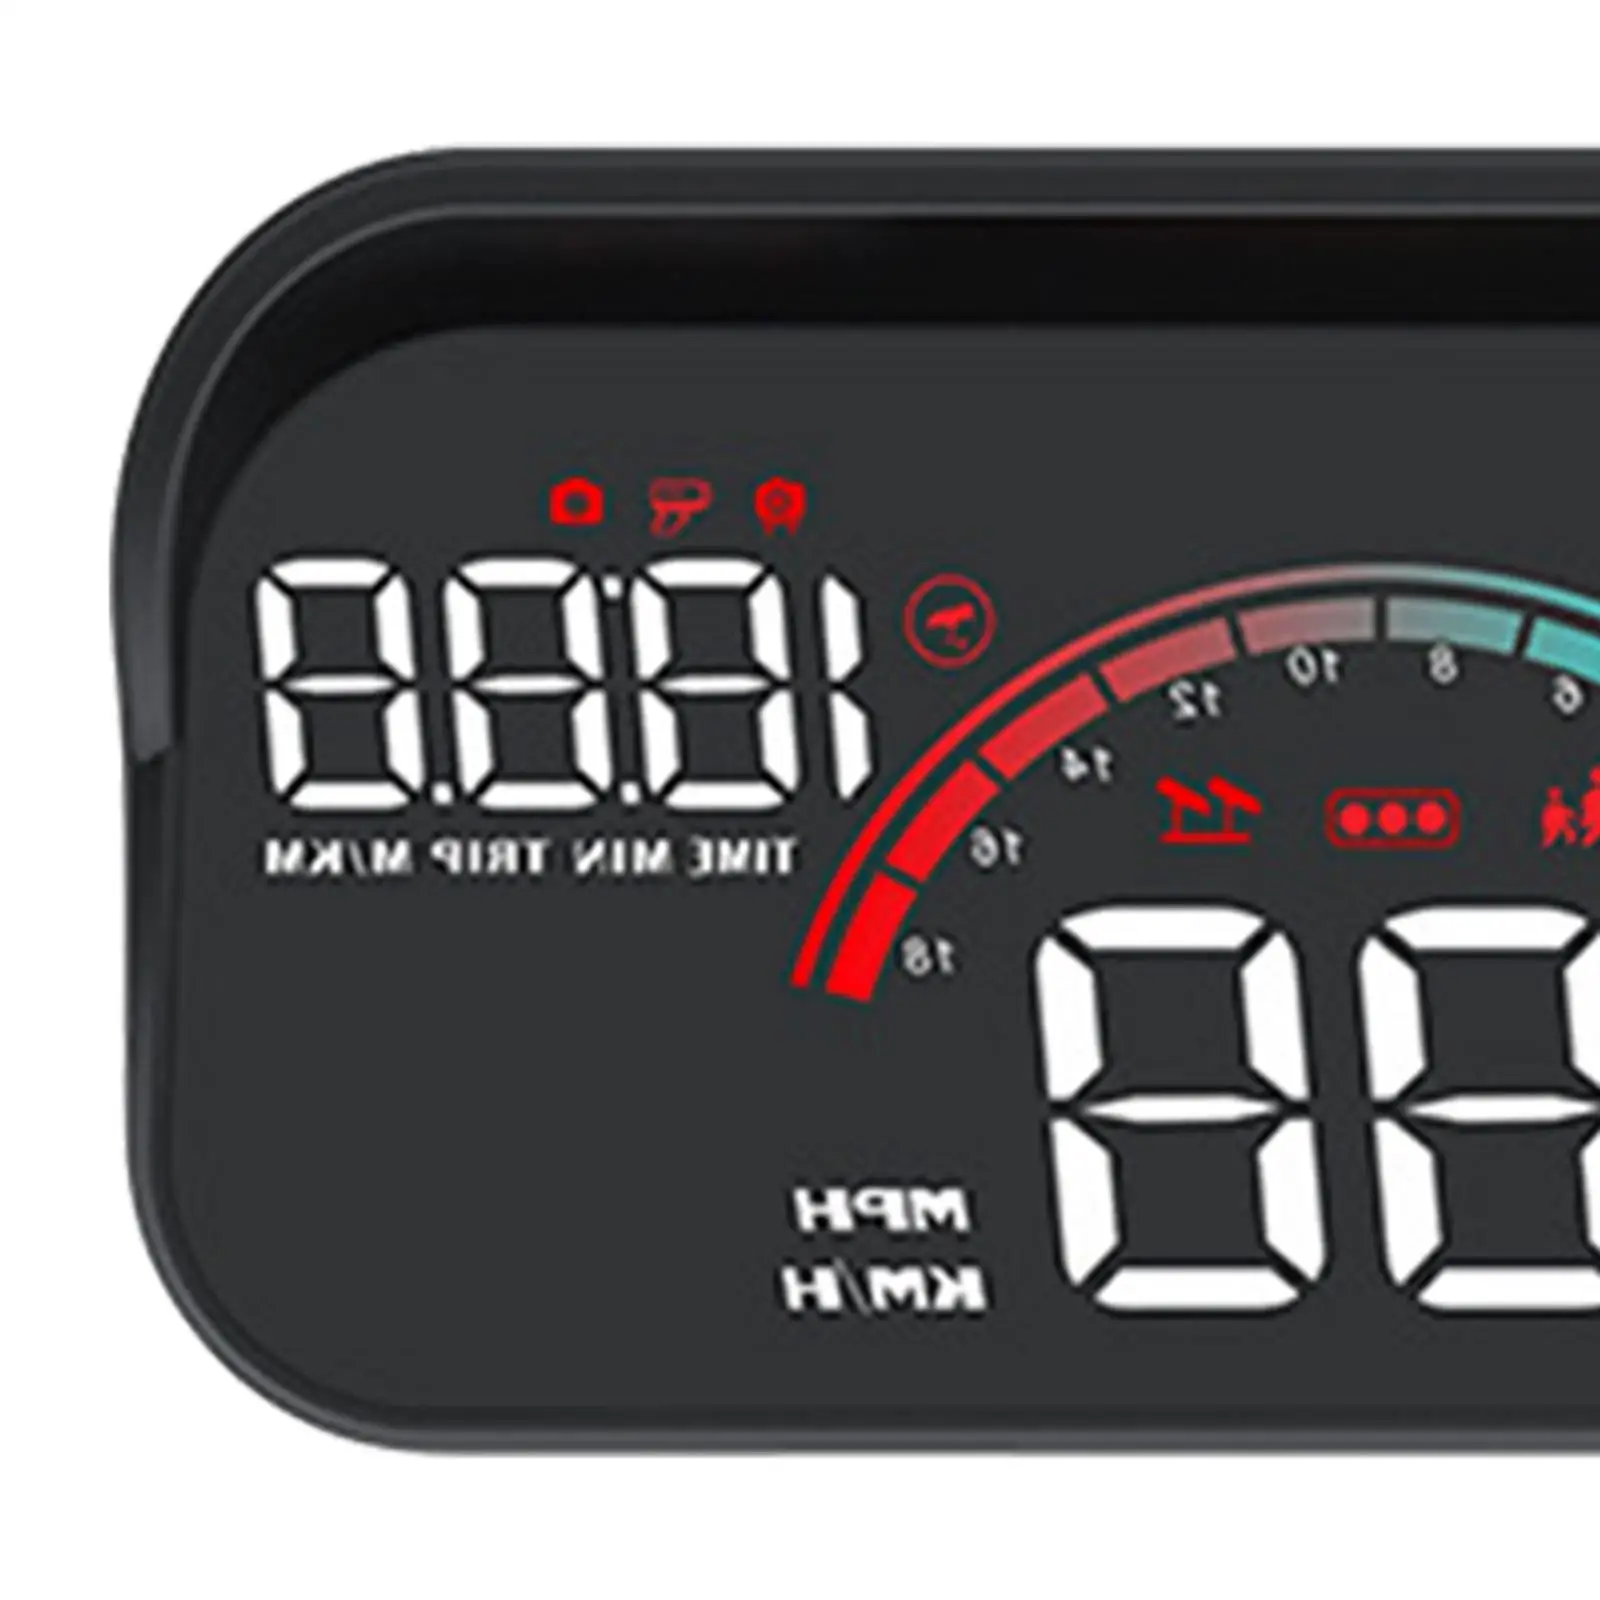 Car Head up Display Car Accessories Multifunctional Universal Digital Speed Odometer for Suvs Cars All Vehicle Buses Trucks